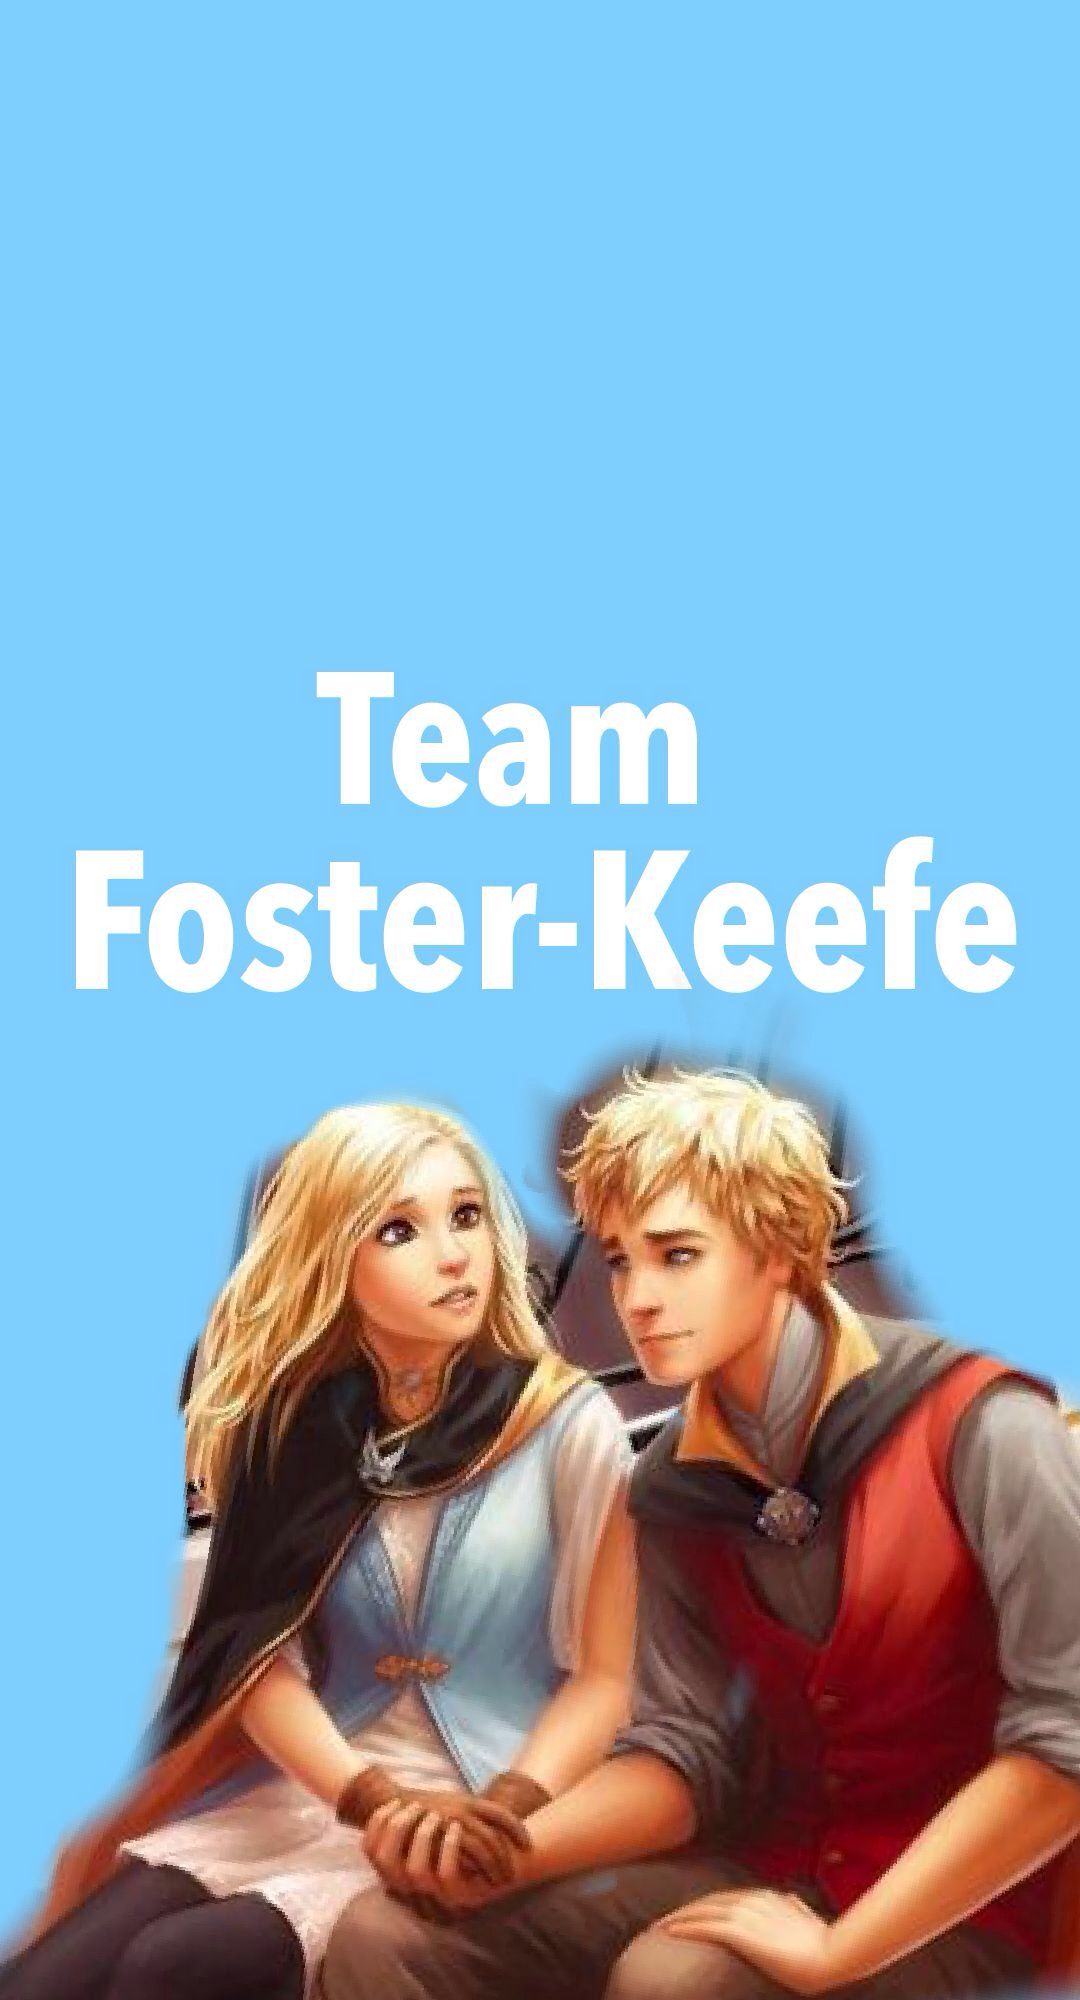 Foster Keefe. Lost City, The Best Series Ever, The Fosters